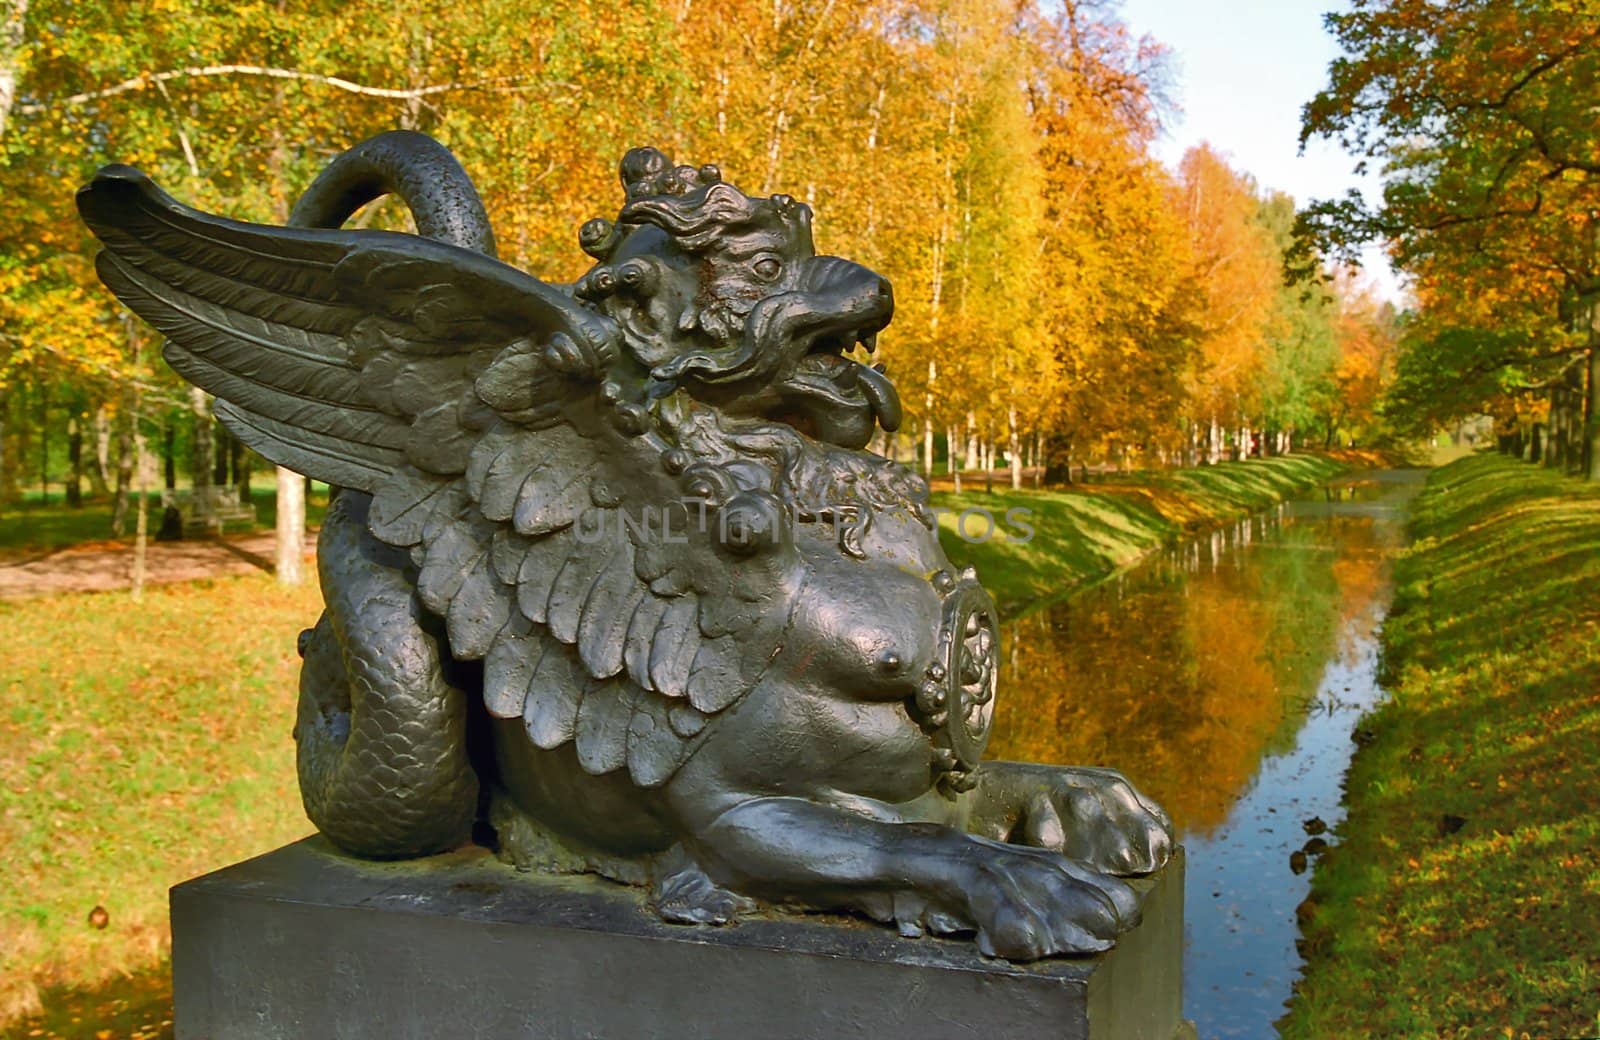 Dragon as a decoration in autumn park by mulden